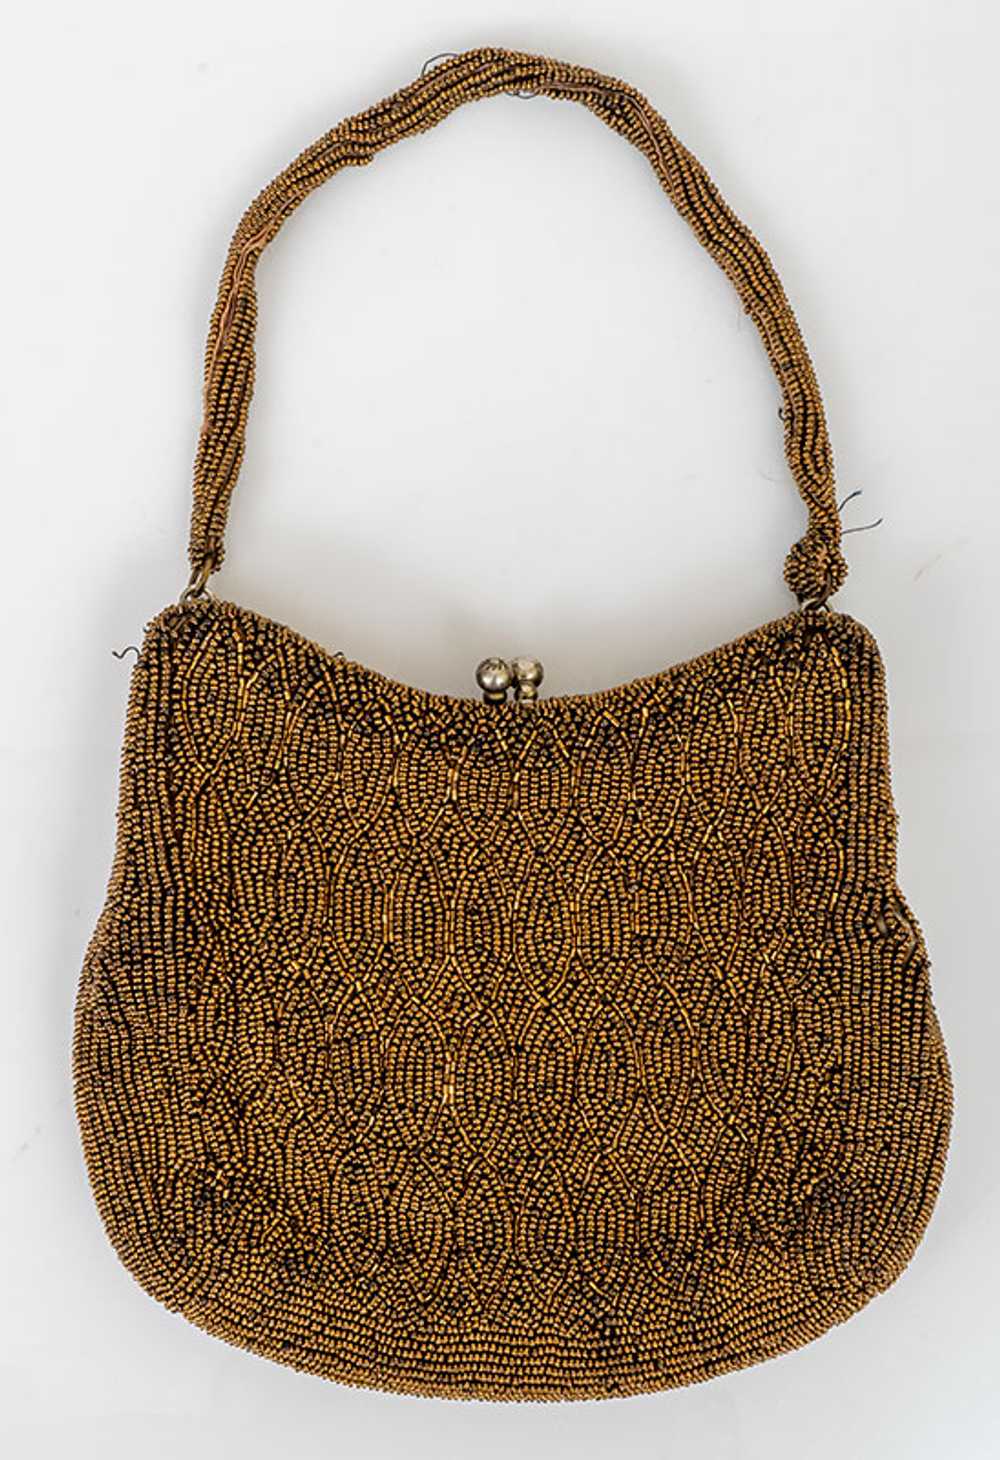 Vintage Beaded Evening Bag by Richere - image 1